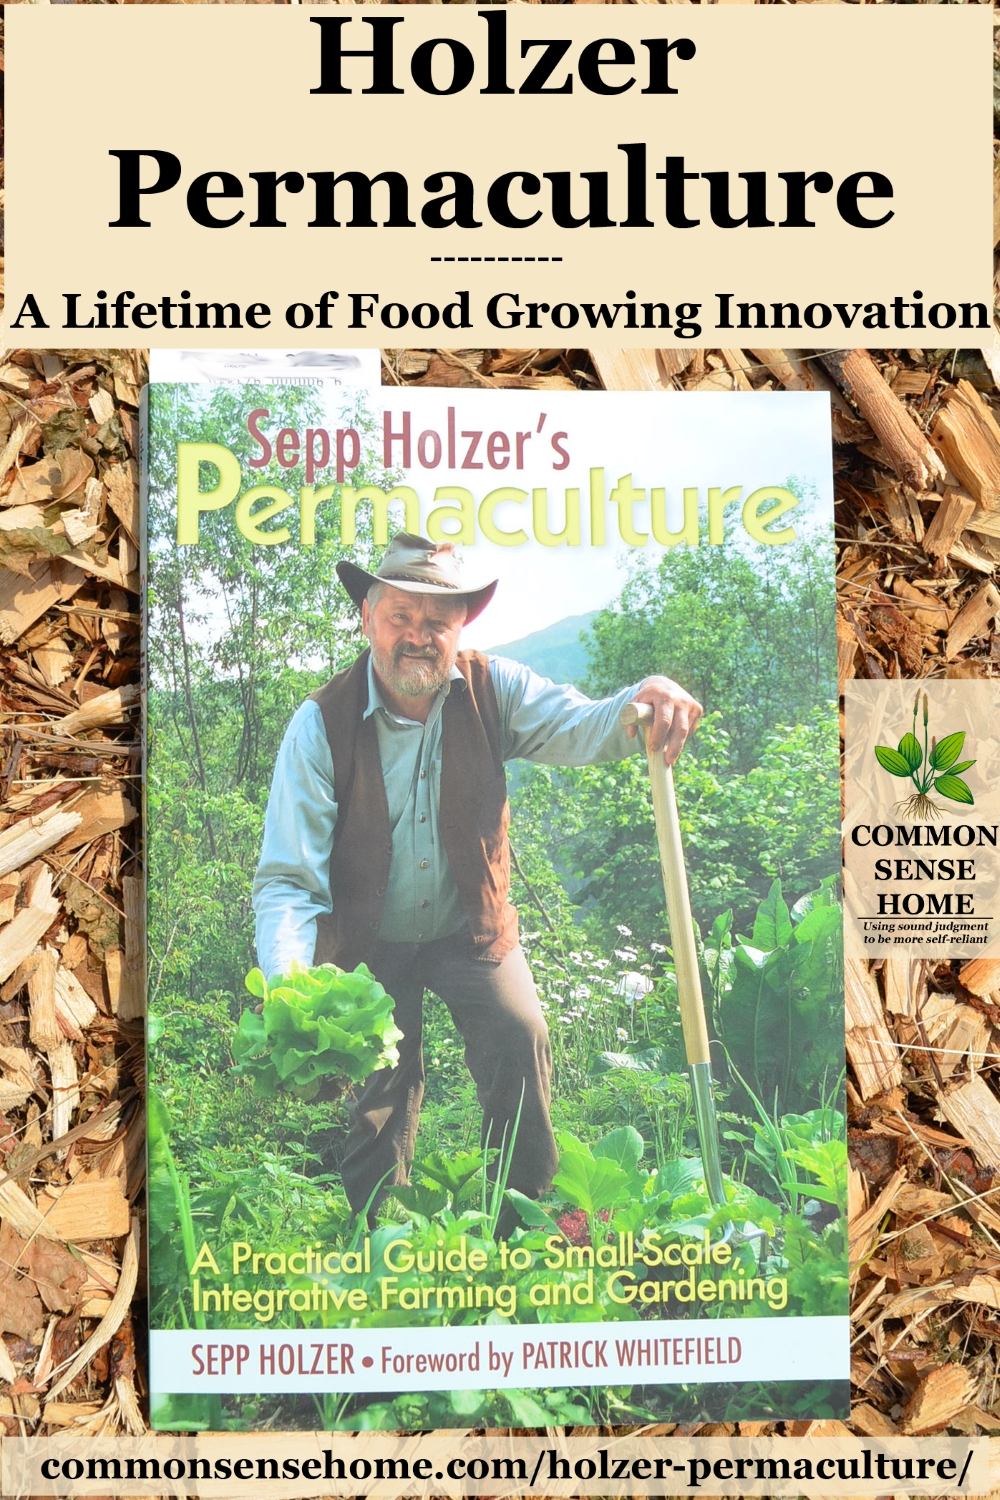 Sepp Holzer's Permaculture book